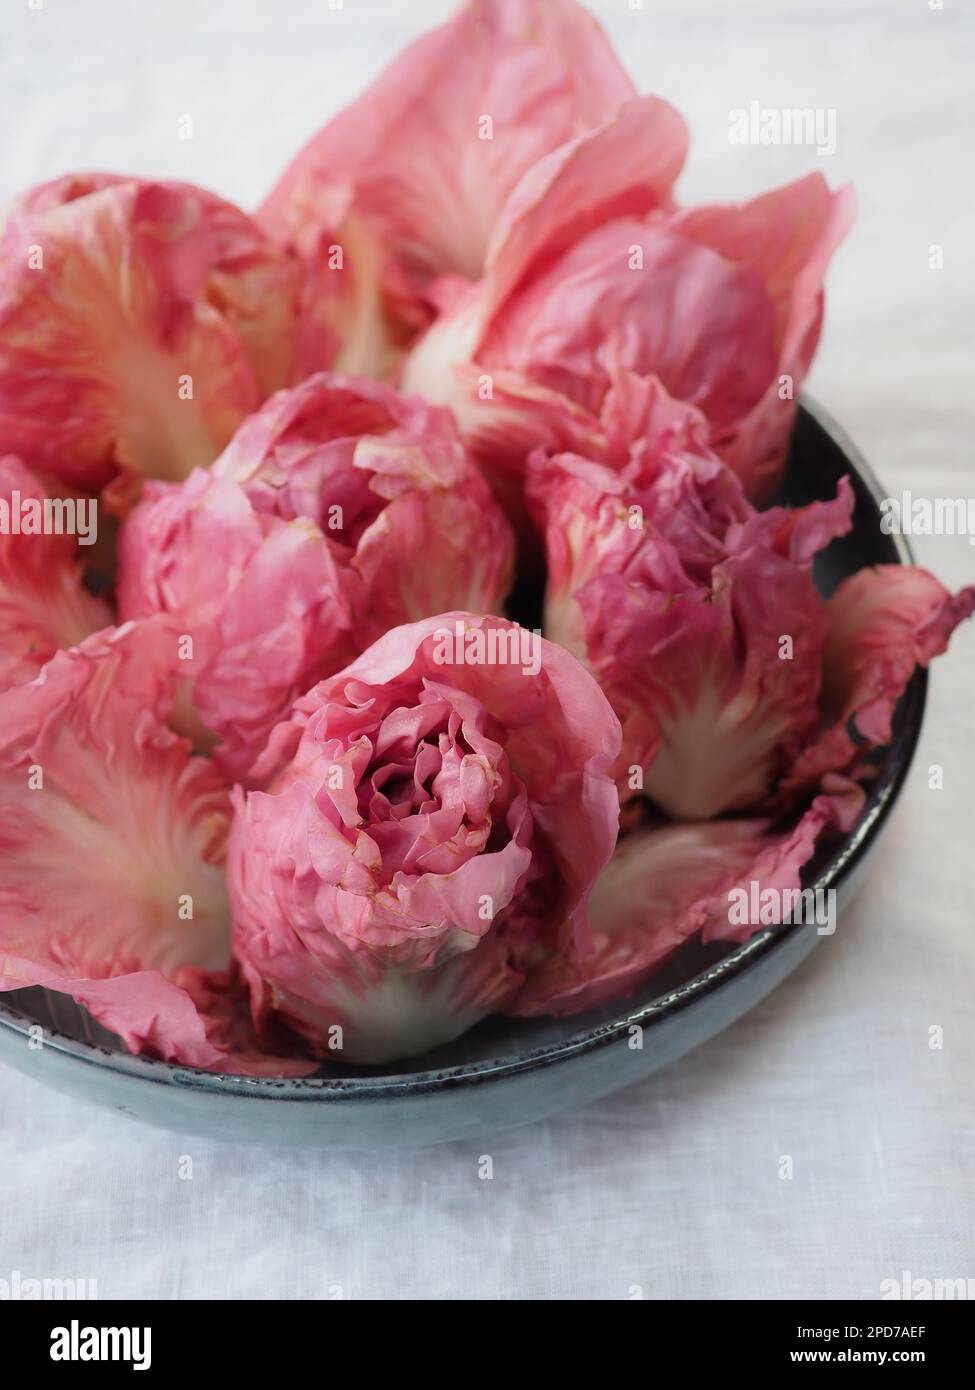 Pink Rosa del Veneto winter chicory / radicchio lettuce heads looking like flowers in a bowl on a white linen tablecloth Stock Photo